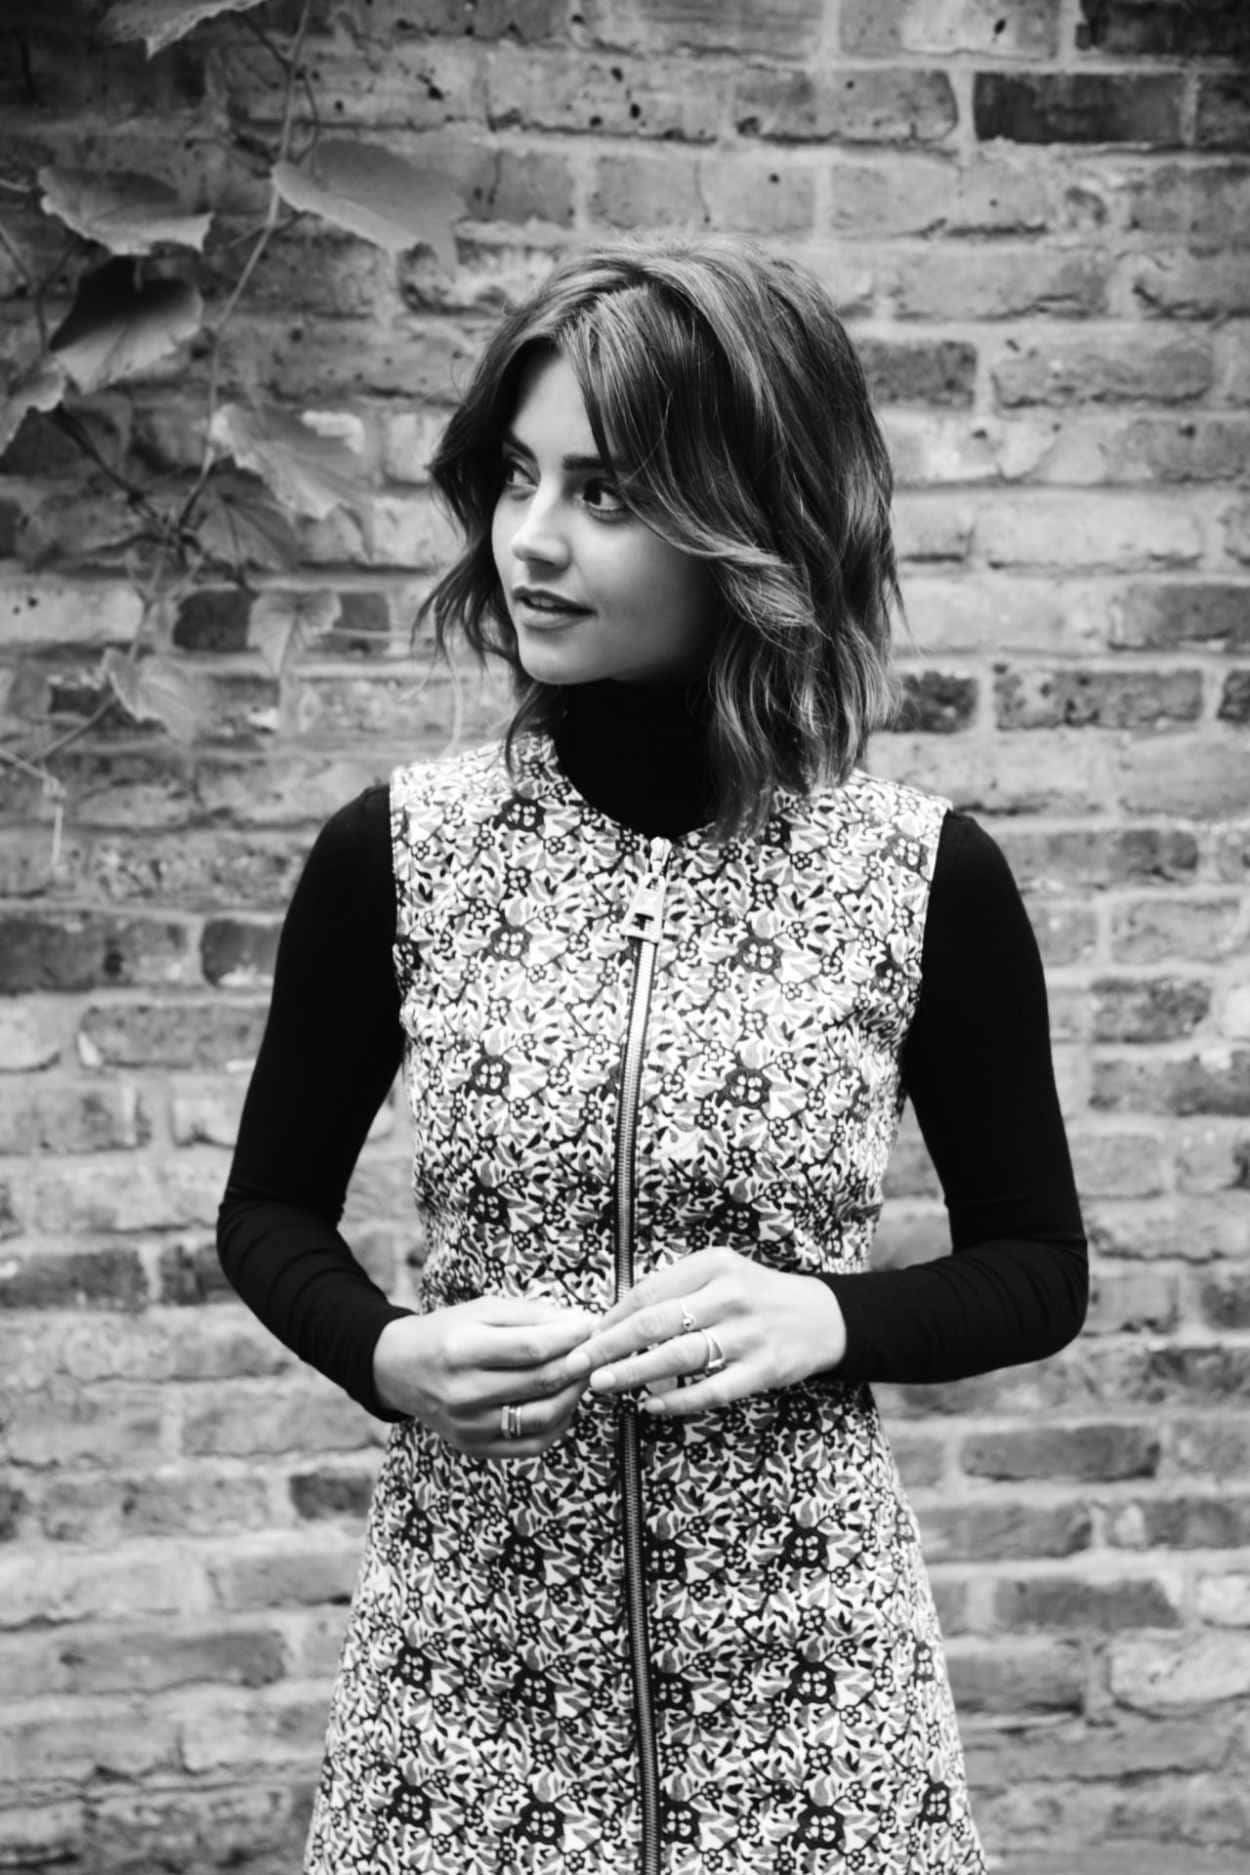 Jenna Coleman Glowing In A Classy Attire Background